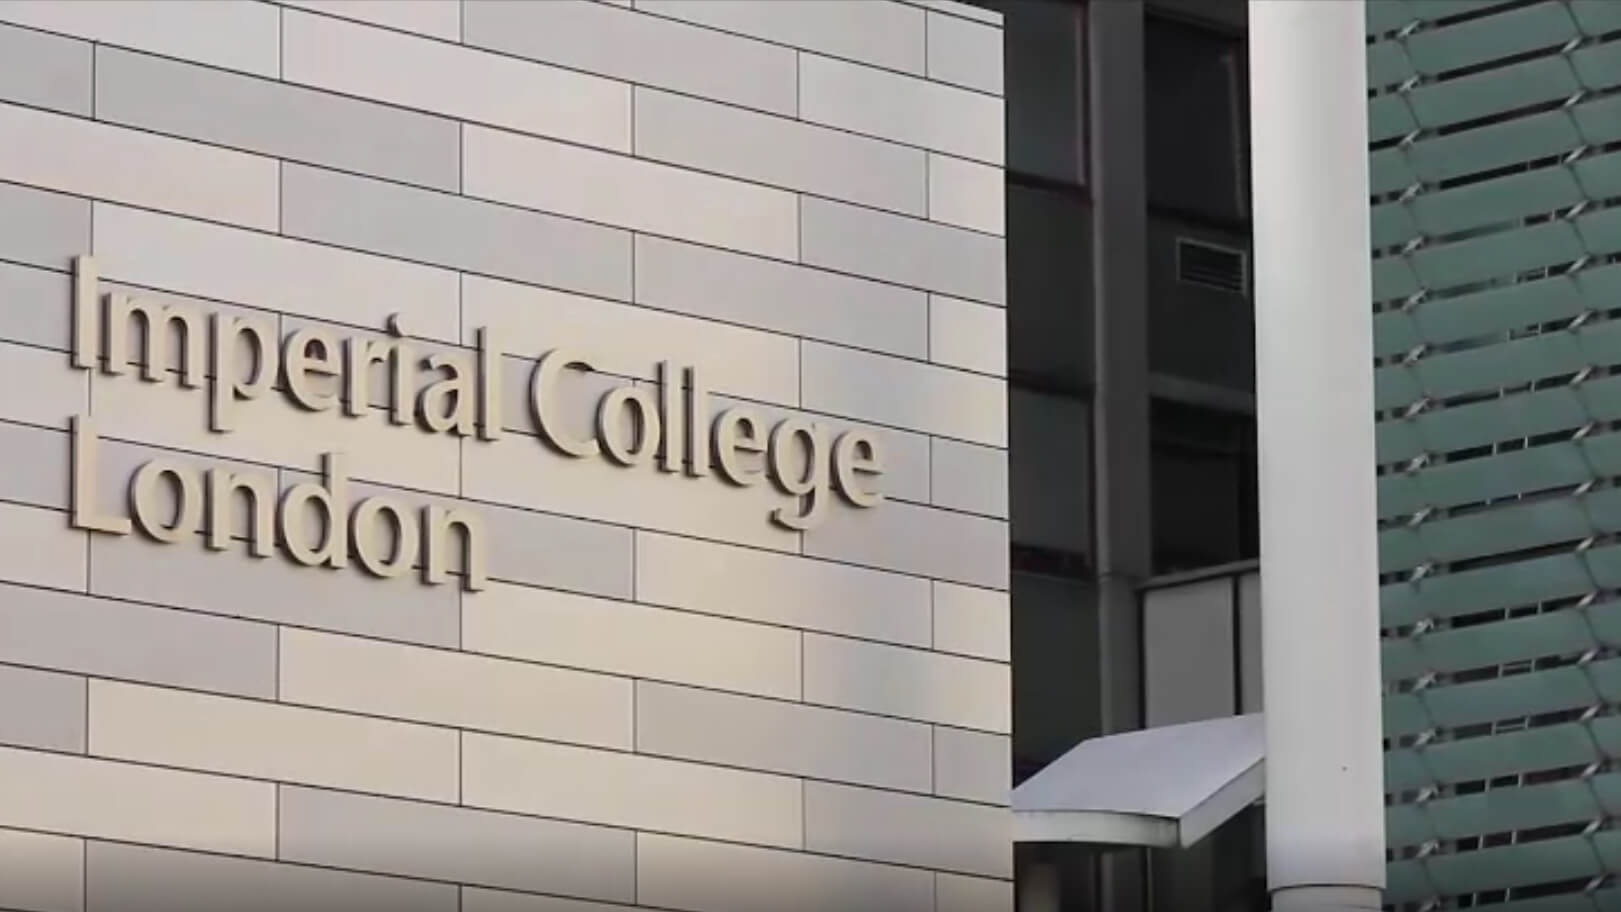 Imperial College London uses Teams to teach and connect